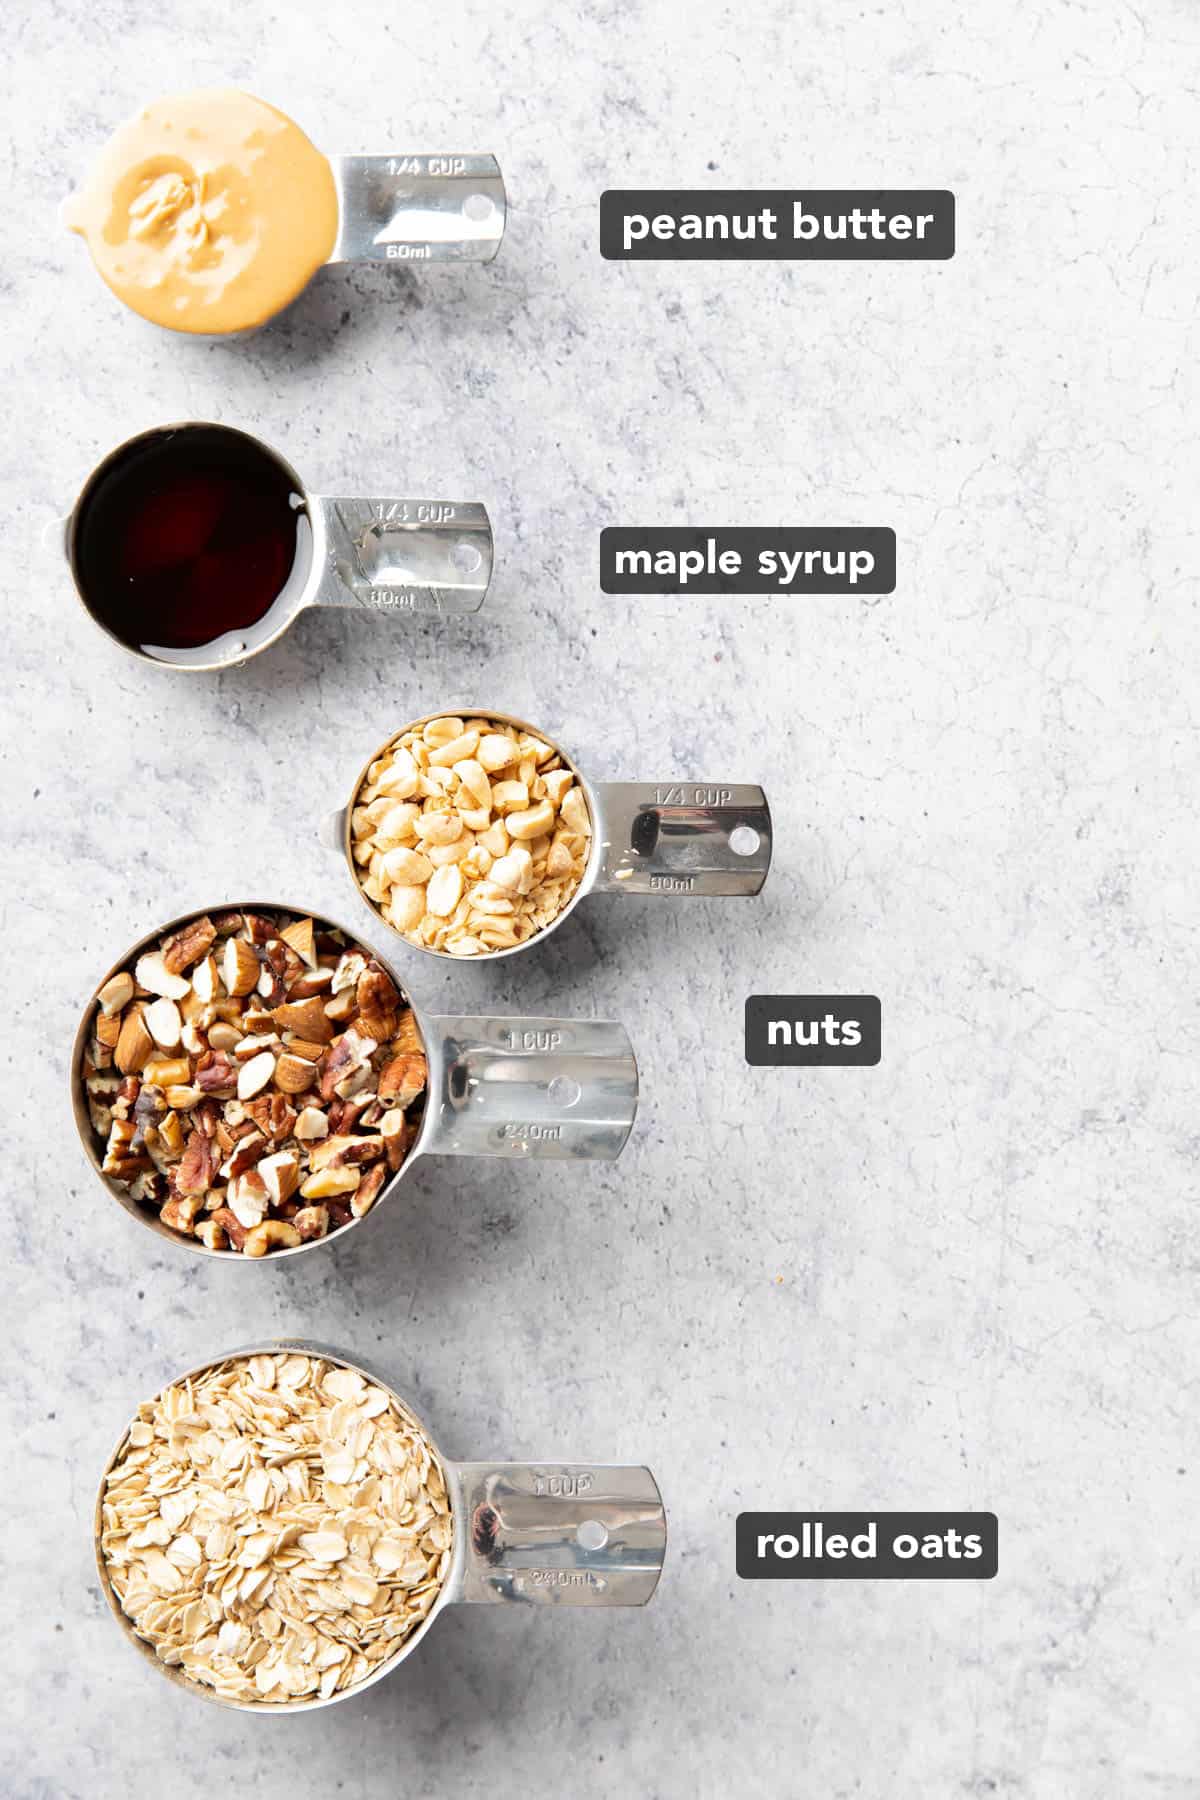 Peanut butter granola ingredients pre-measured in cups on a table